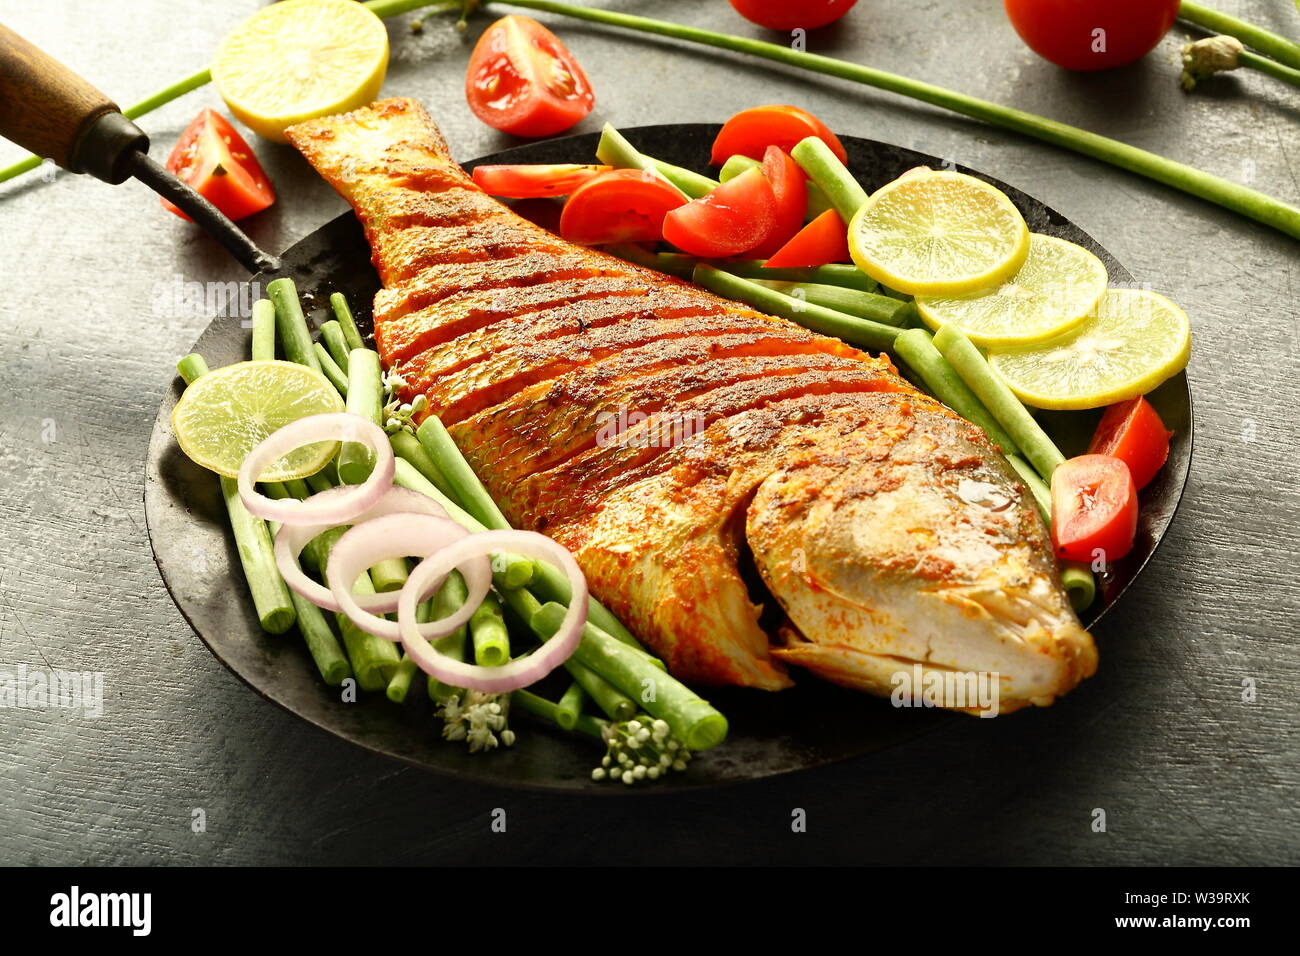 Spicy roasted fish with green salad - Healthy meal concepts Stock Photo